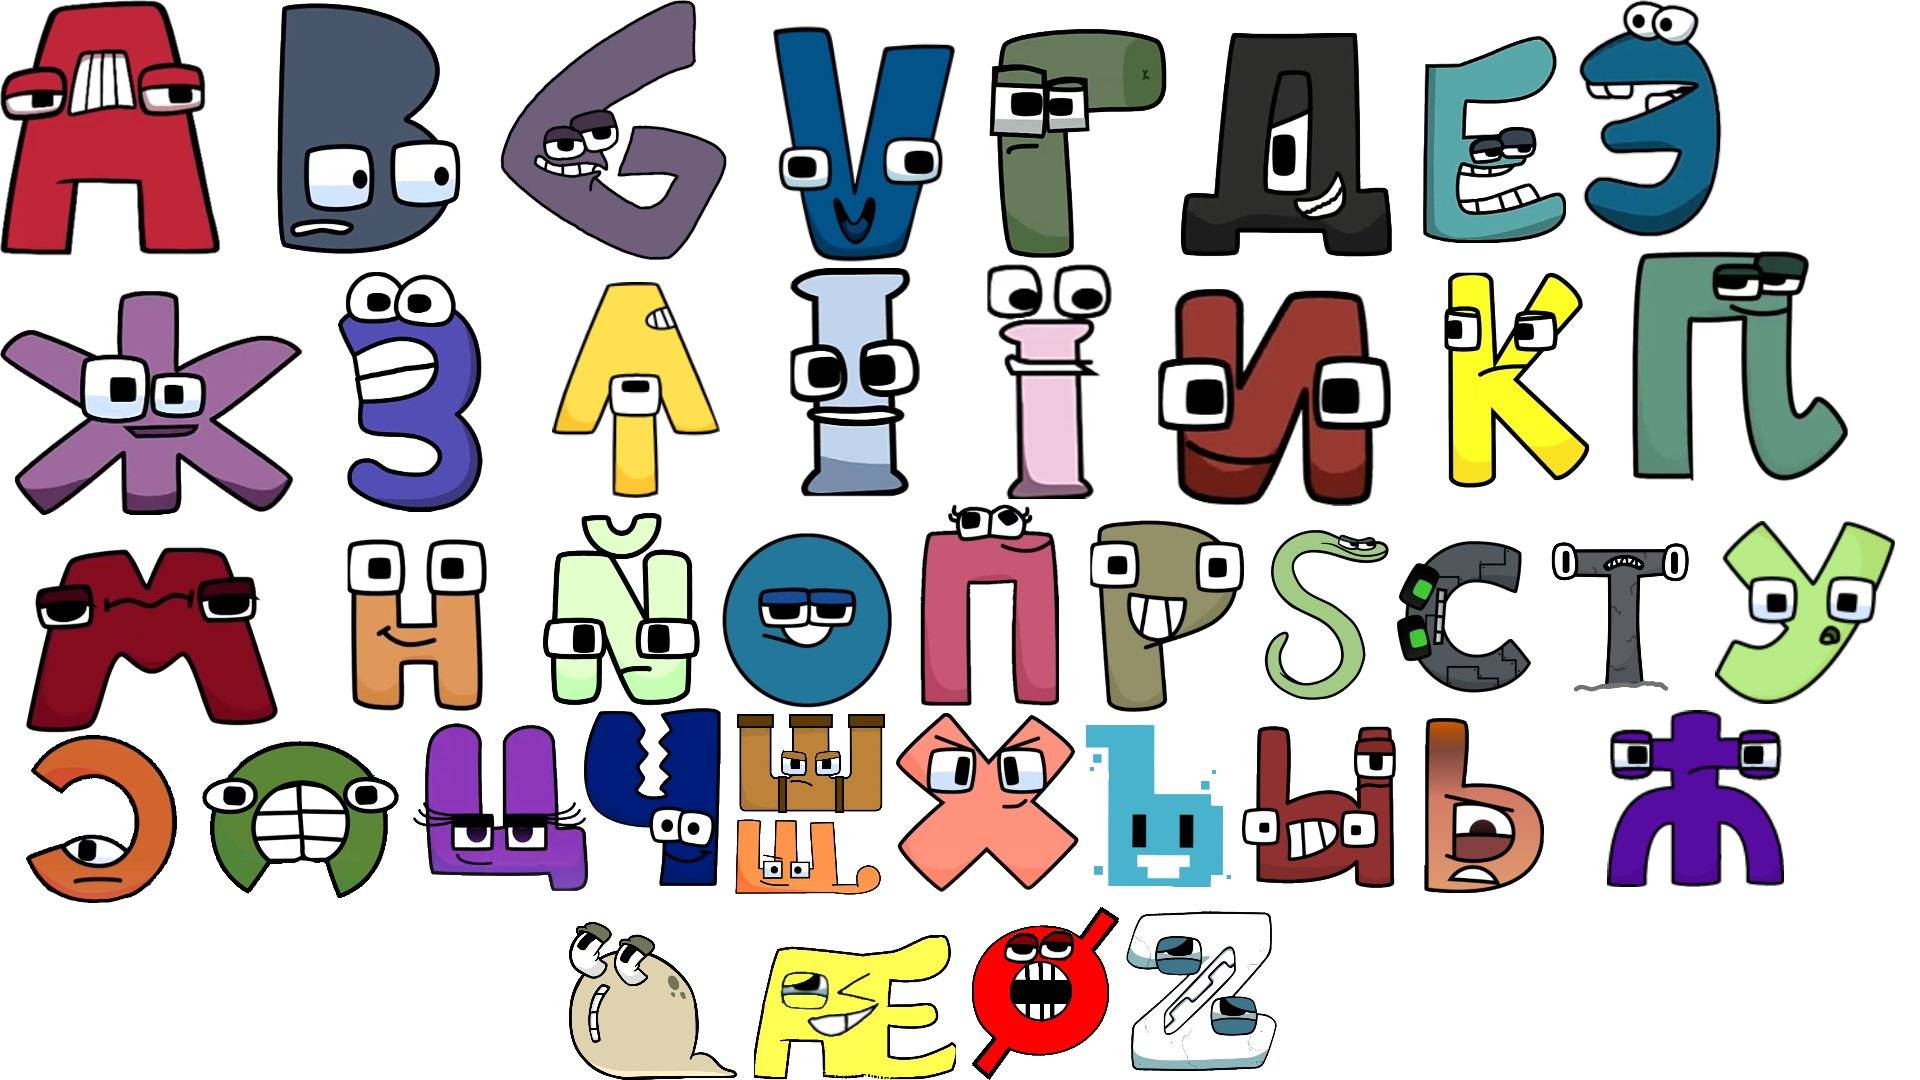 Alphabet Lore Is At Uppercase And Lowercase! by TheBobby65 on DeviantArt